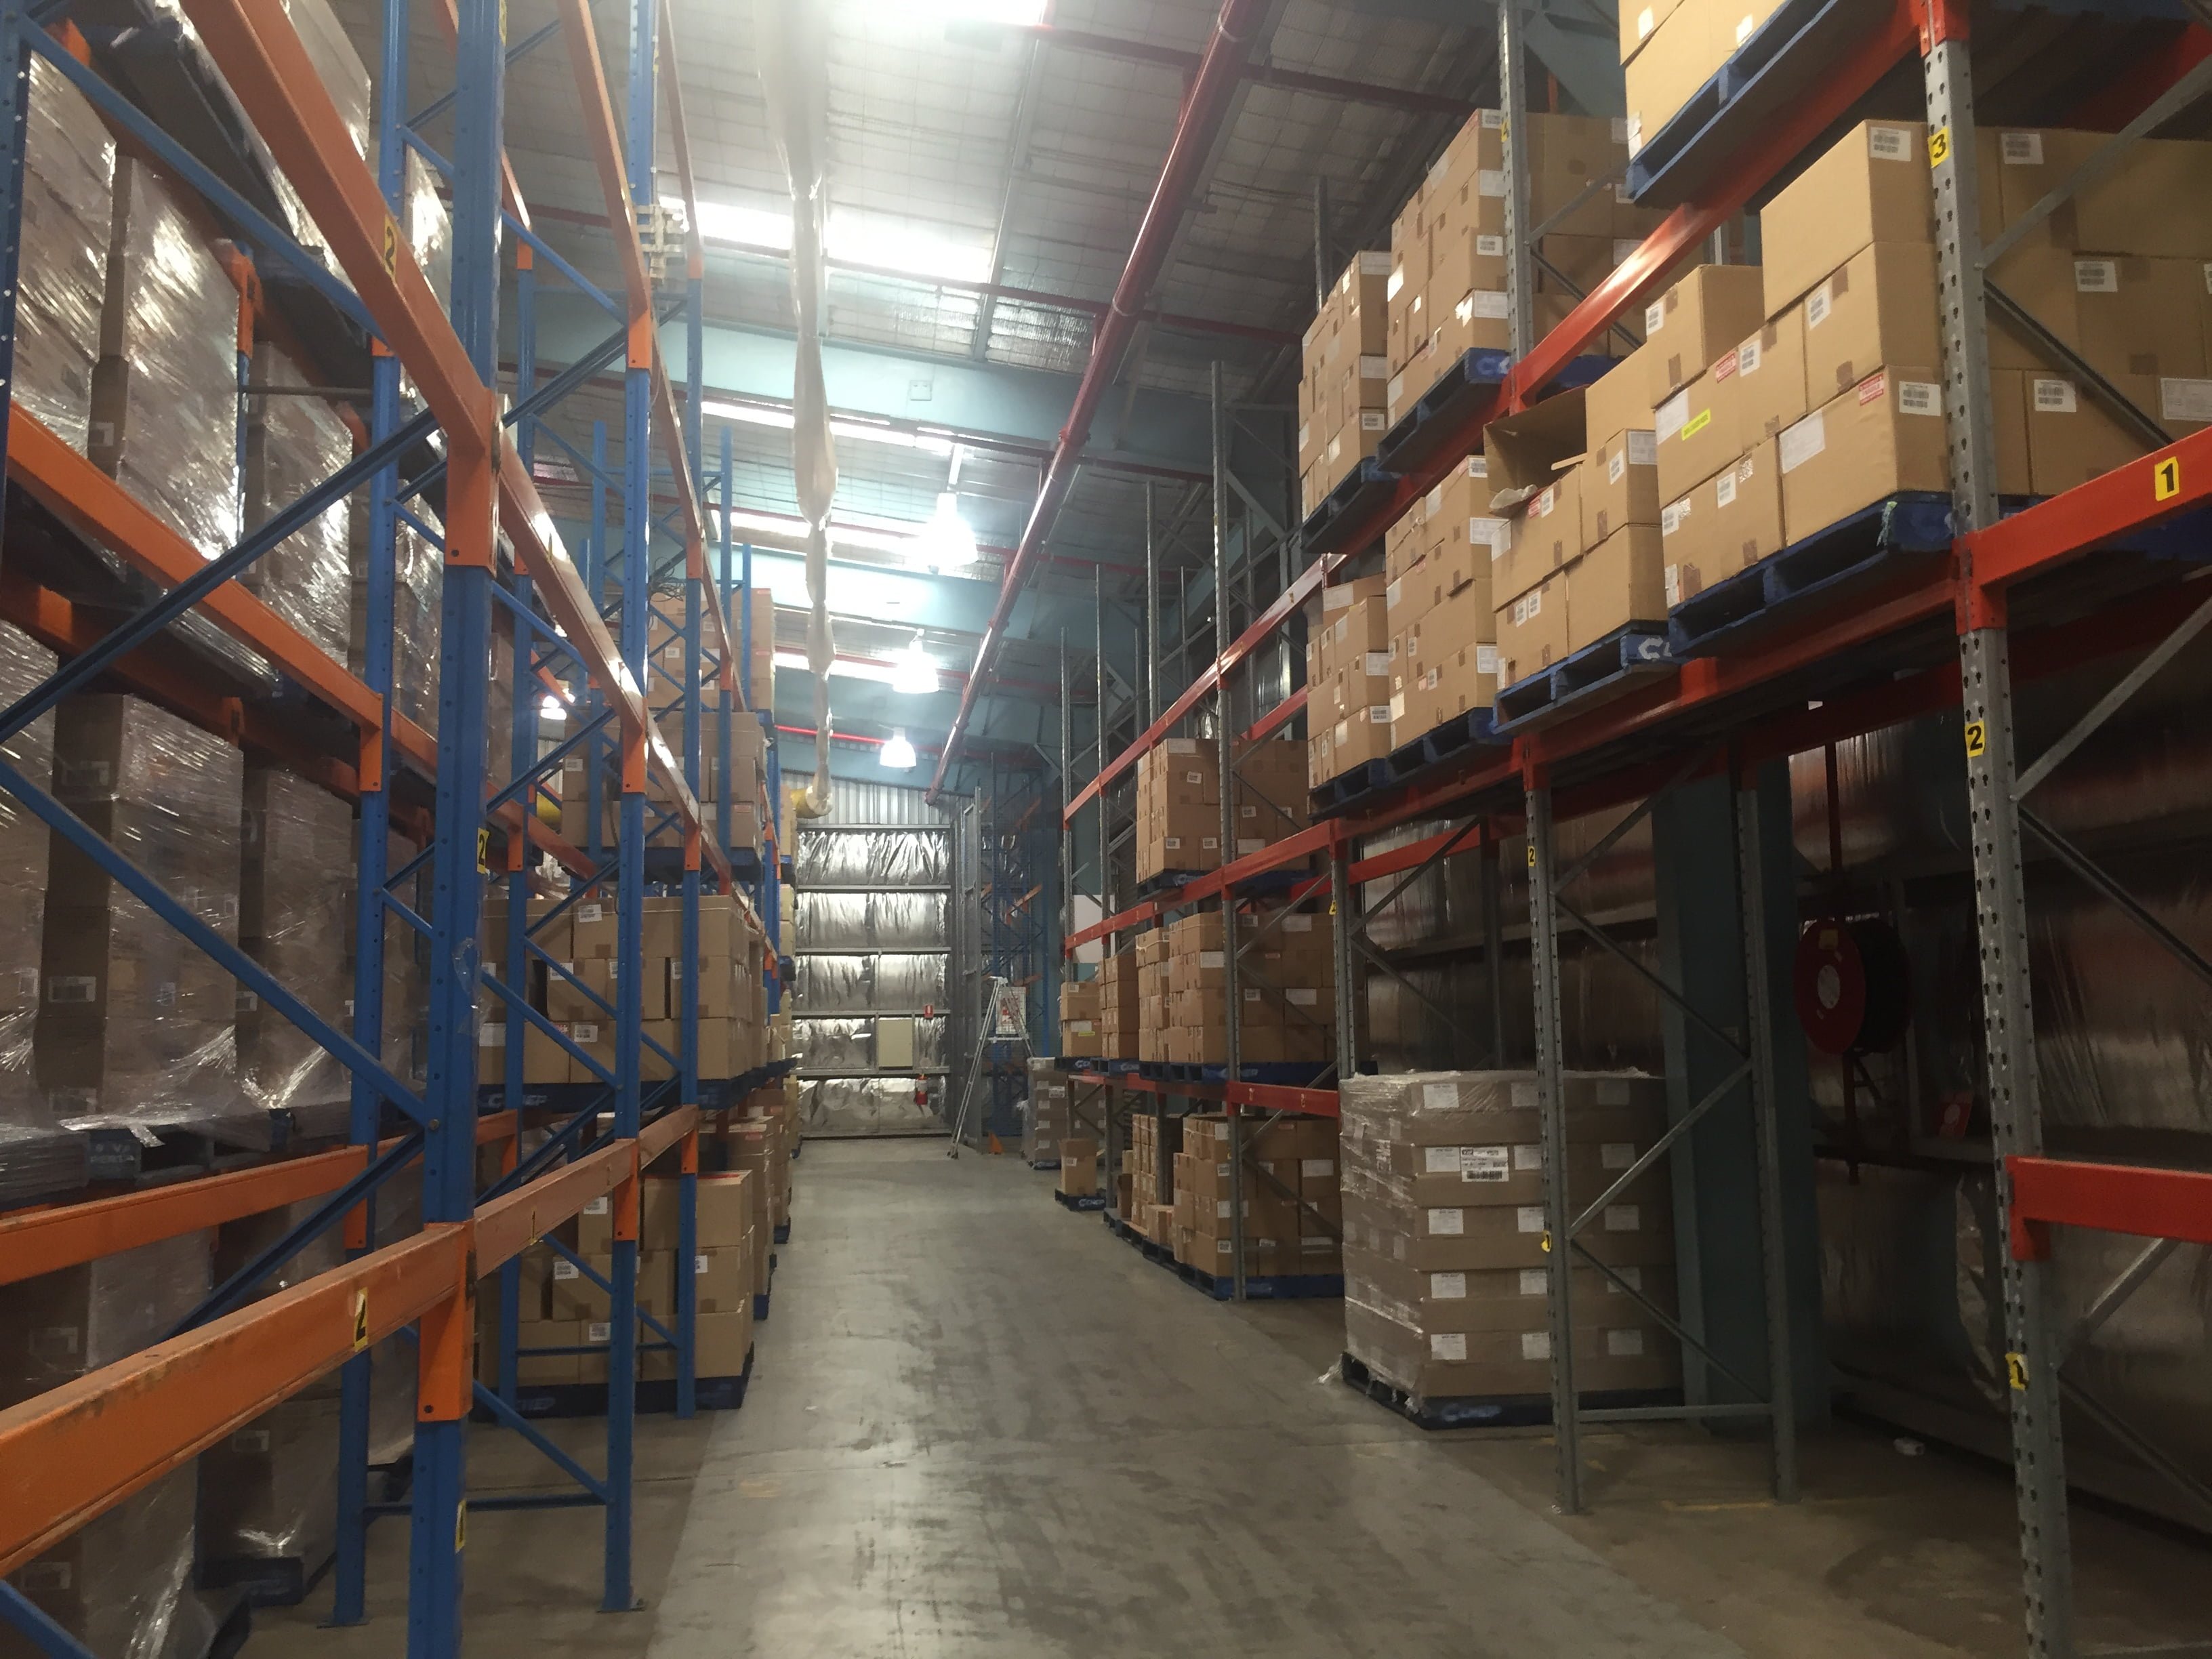 Woolworths and Cold Logic Distribution Centre in Queensland